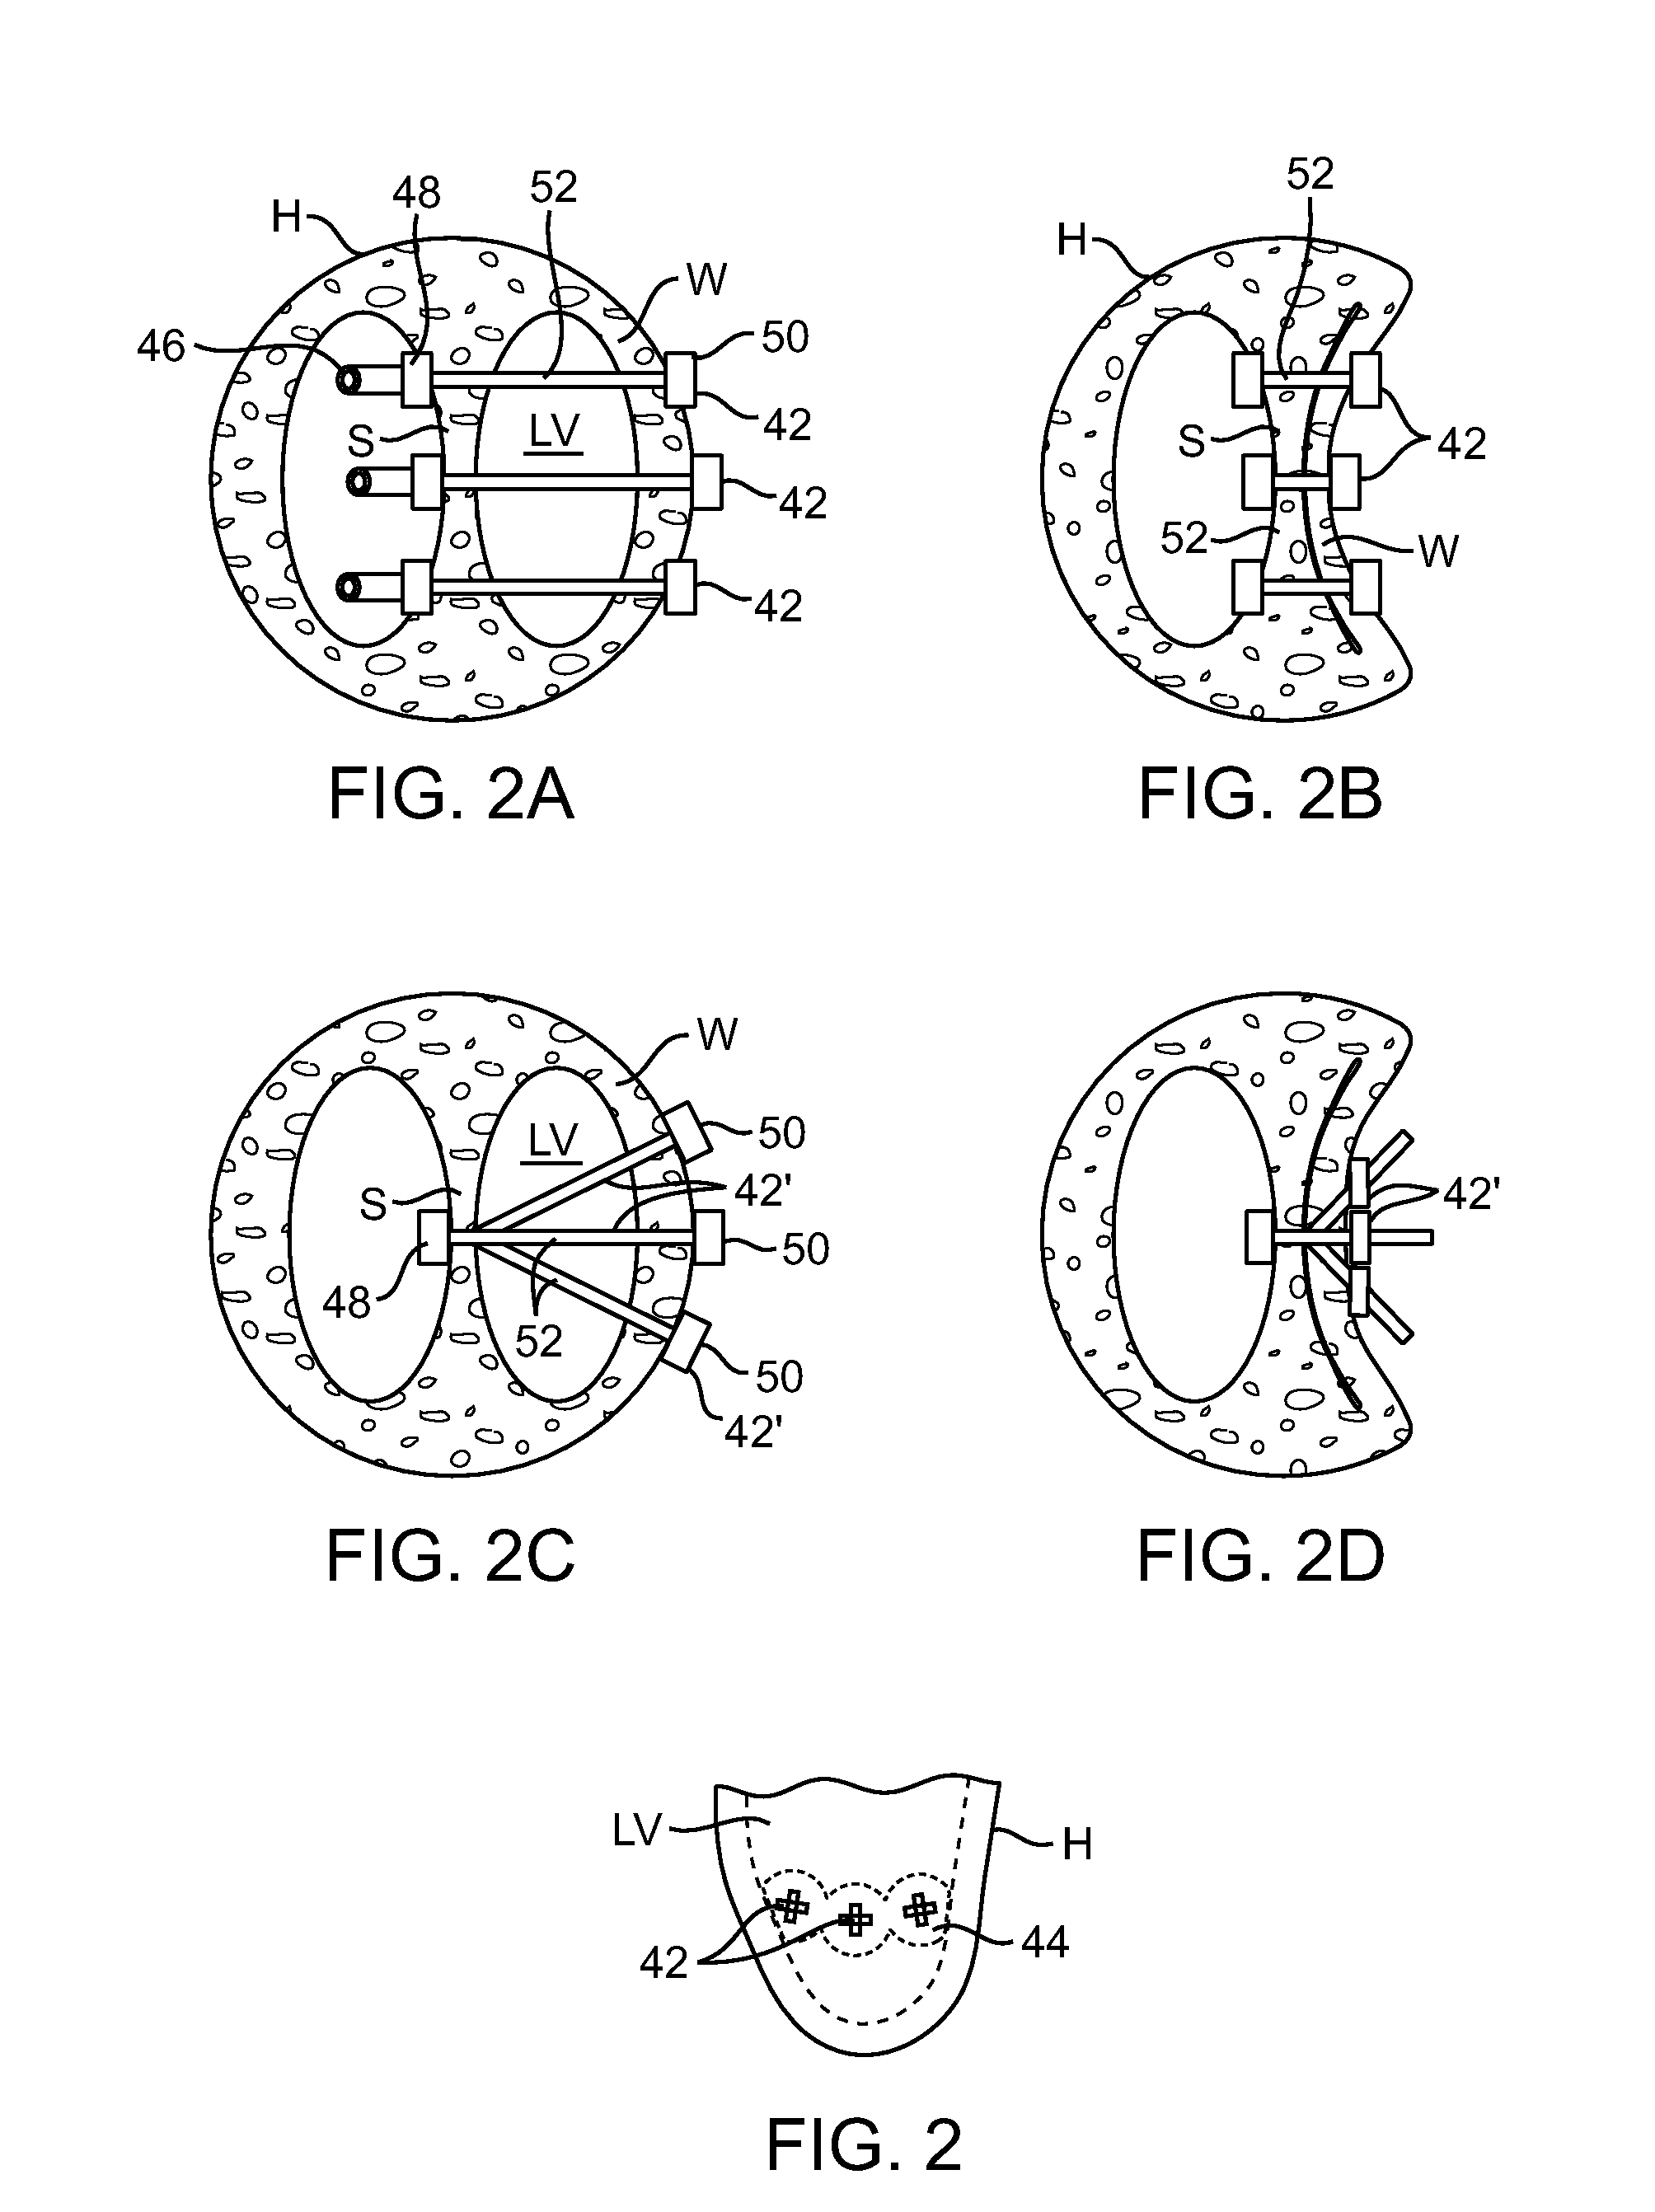 Location, time, and/or pressure determining devices, systems, and methods for deployment of lesion-excluding heart implants for treatment of cardiac heart failure and other disease states